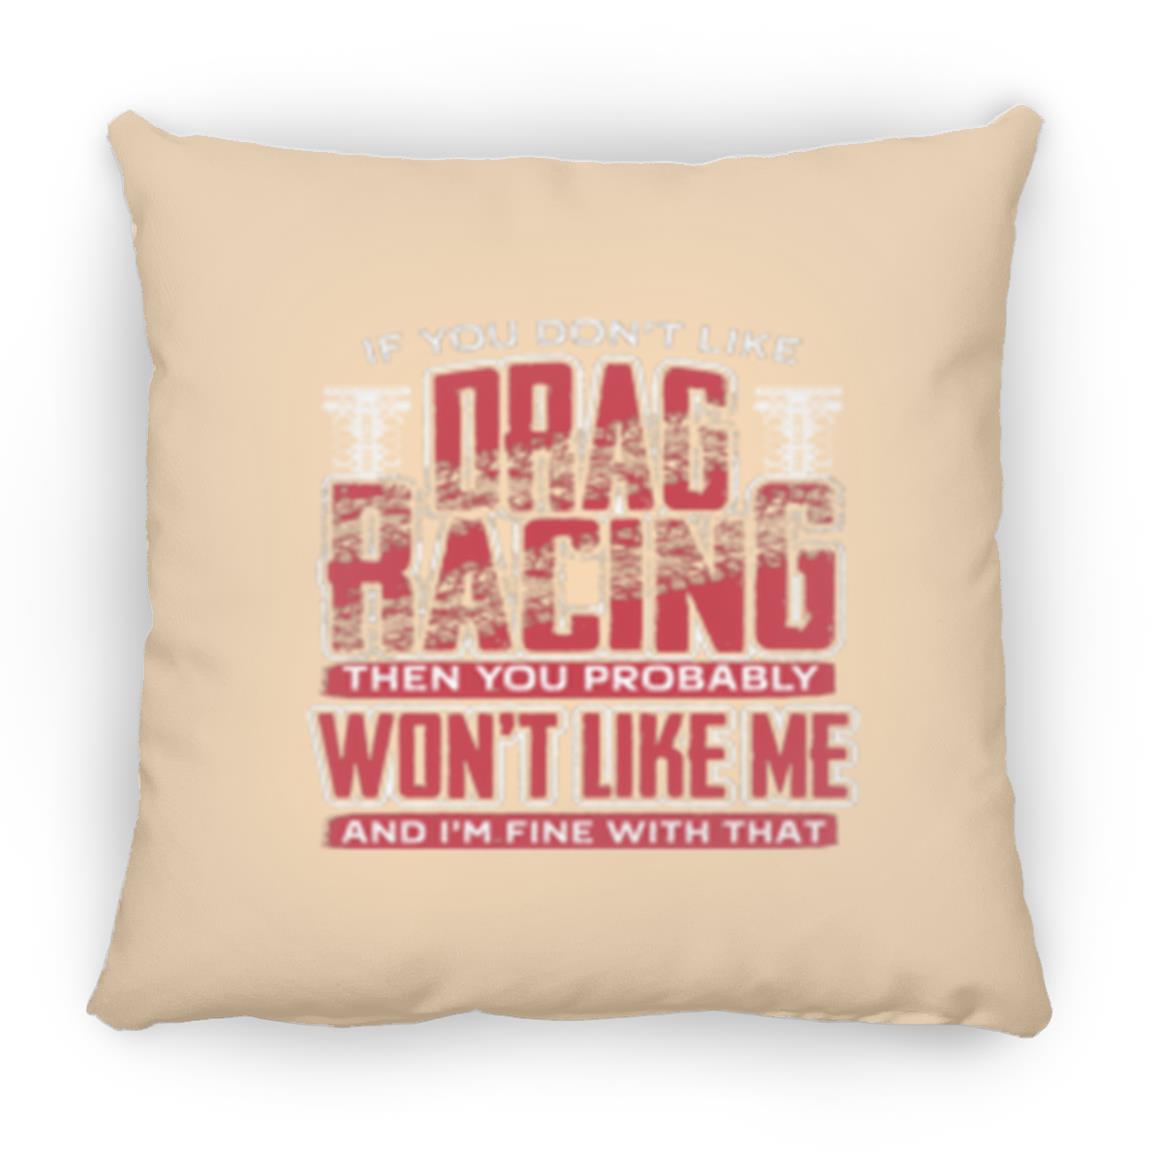 If You Don't Like Drag Racing Large Square Pillow